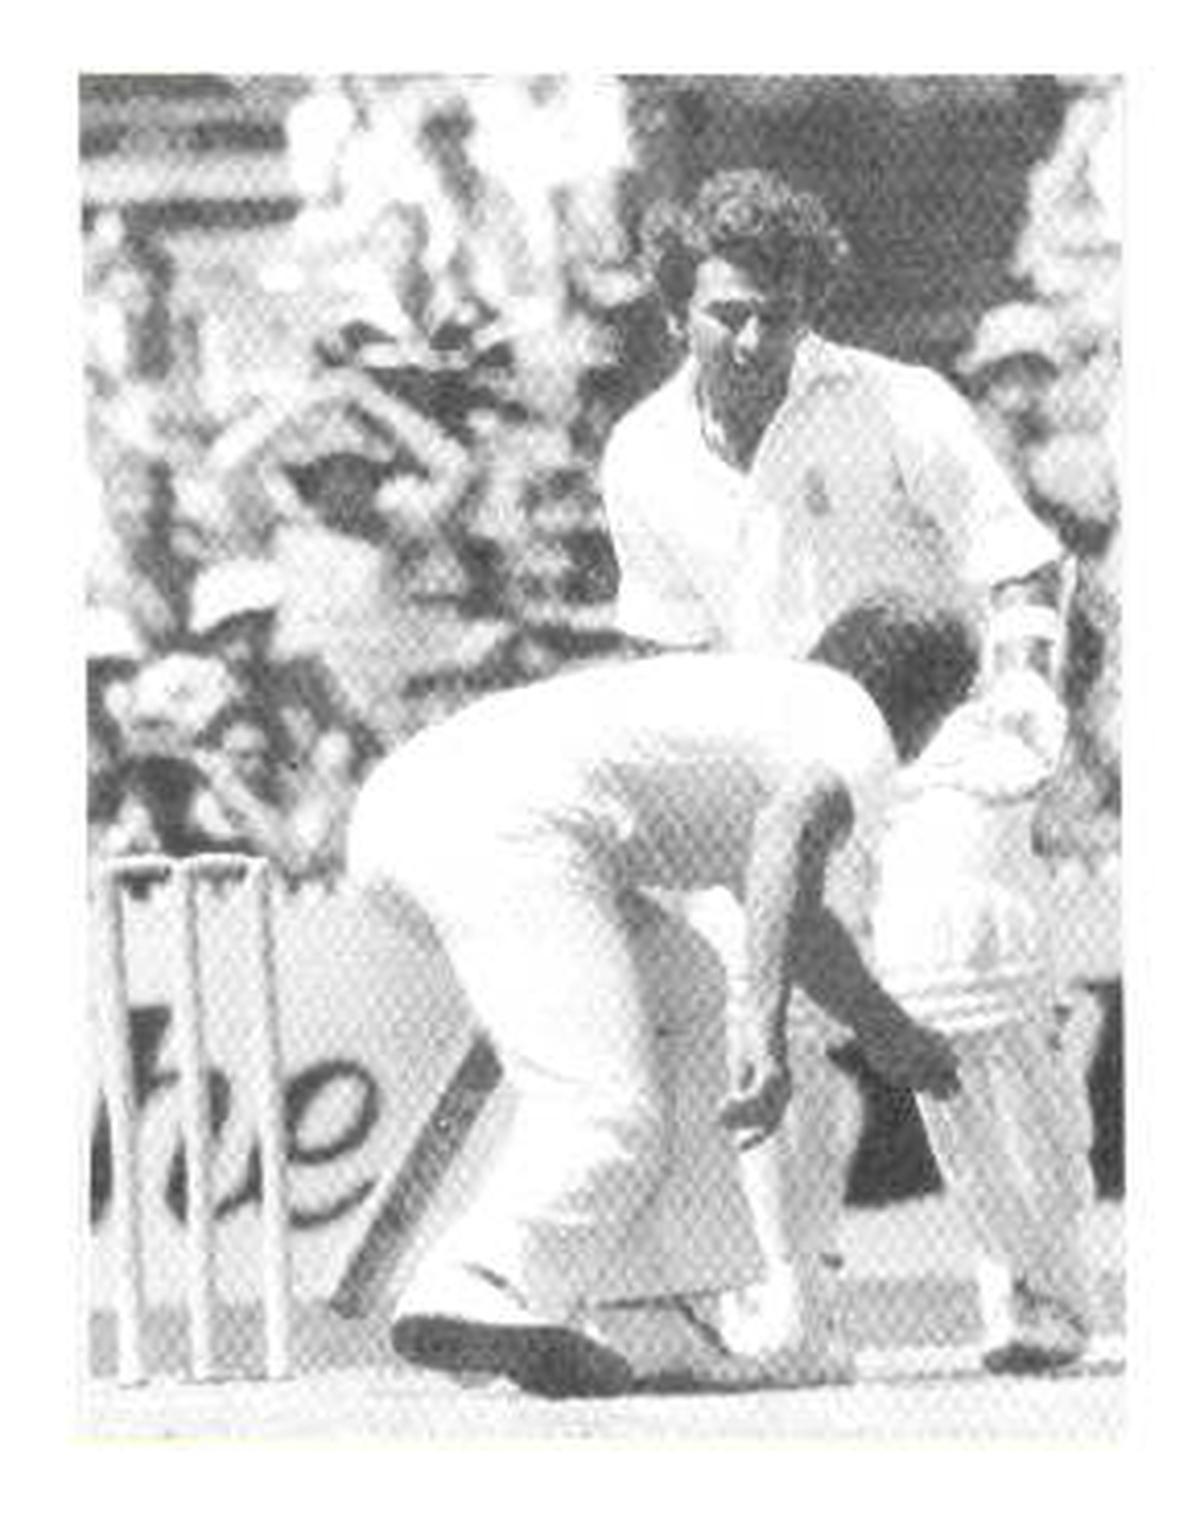 Sunil Gavaskar, not satisfied with leg-before decision, stormed off with his opening partner Chauhan. 